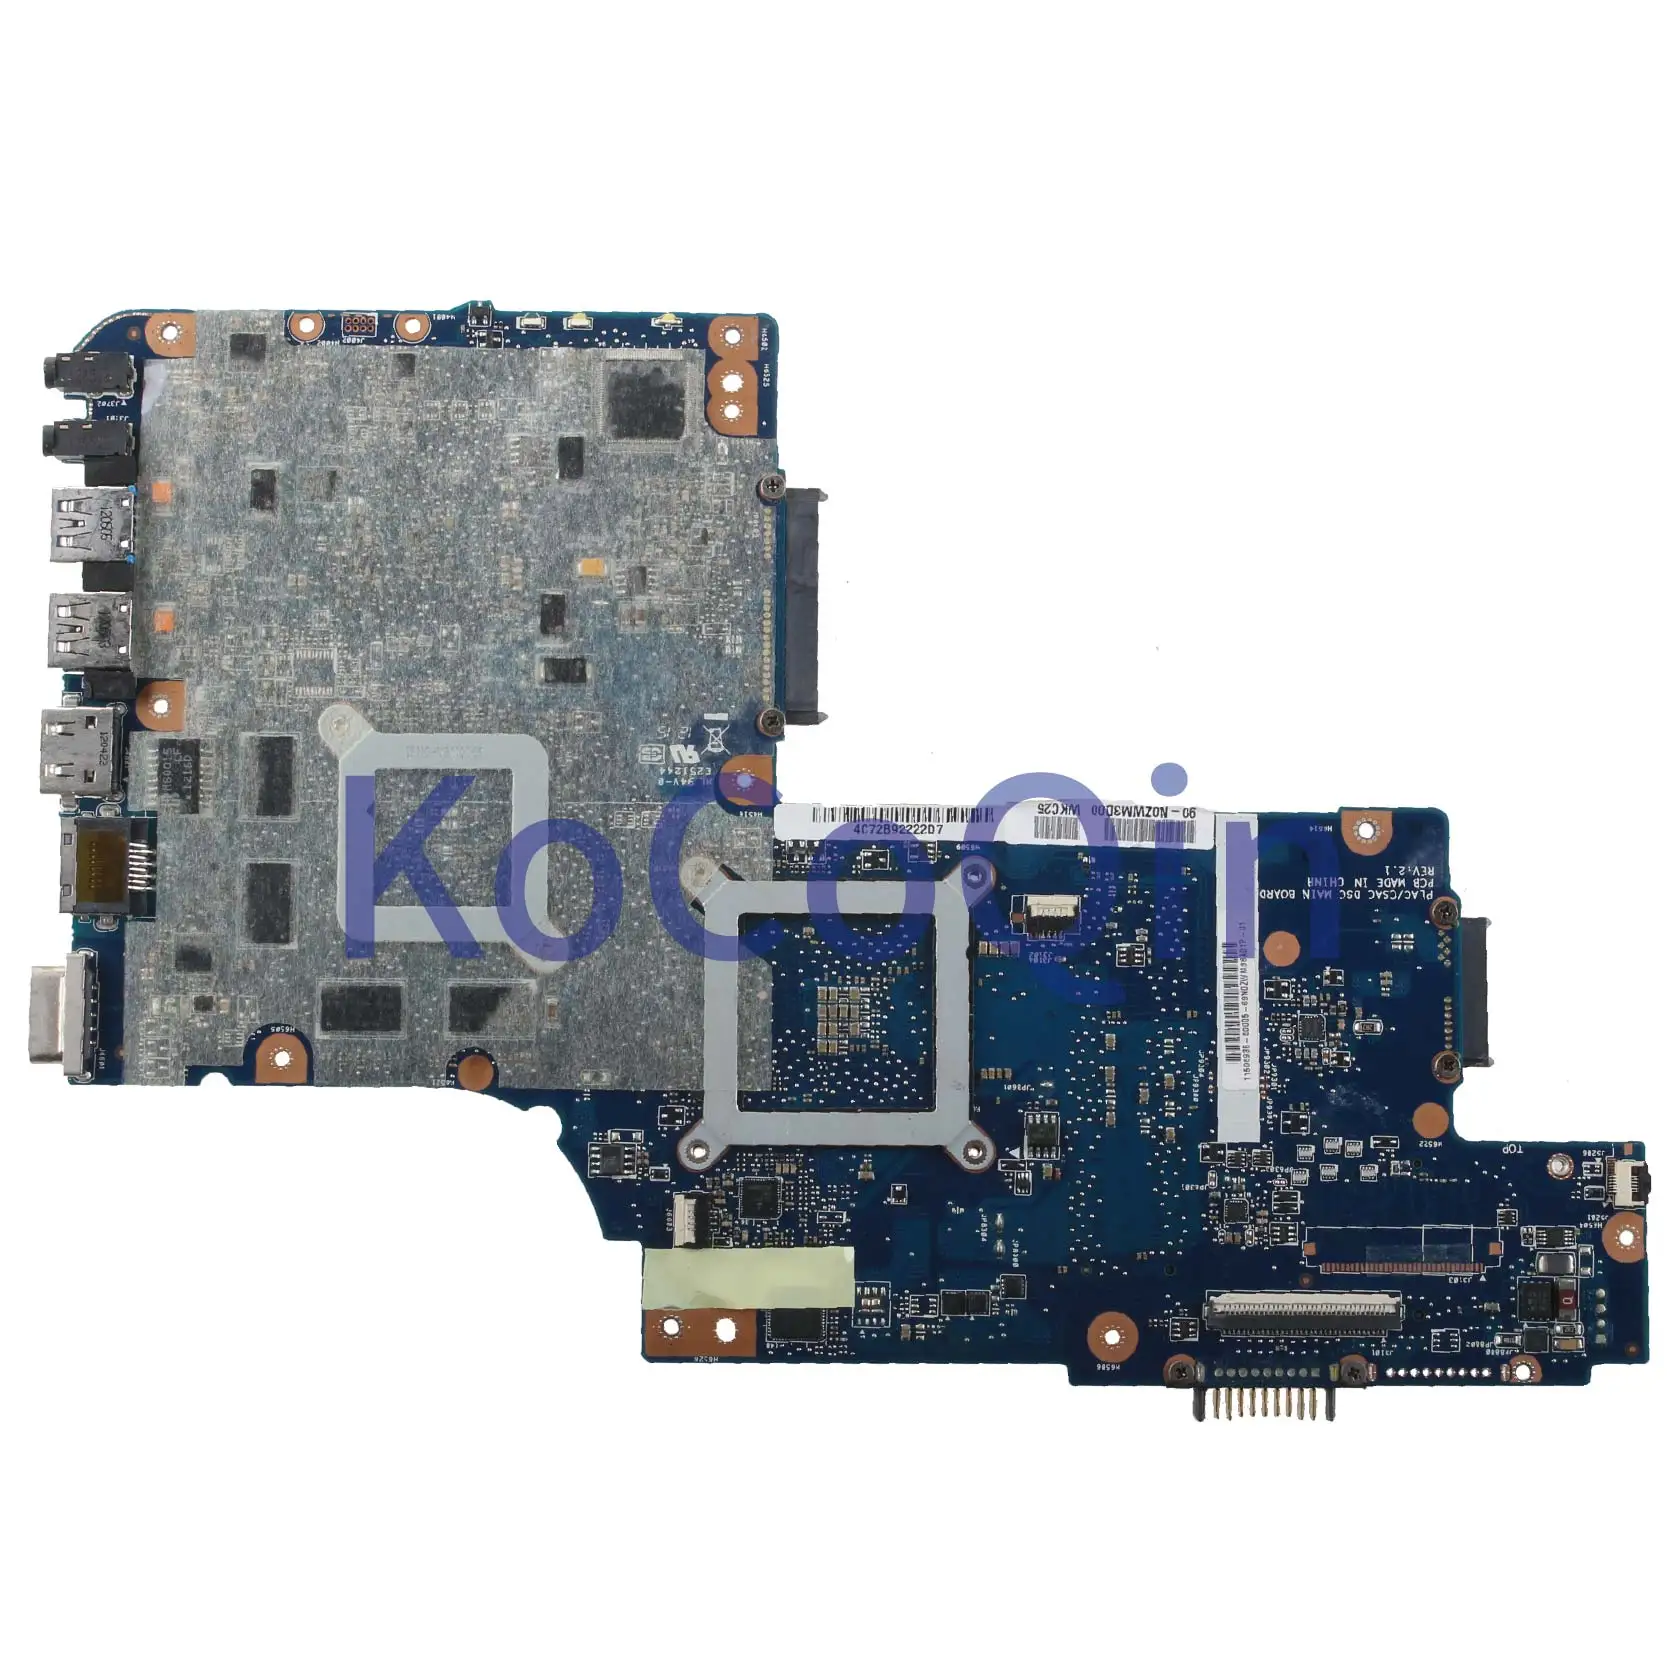 Promotion  KoCoQin Laptop motherboard For TOSHIBA Satellite C850D C855D Mainboard 216-0810028